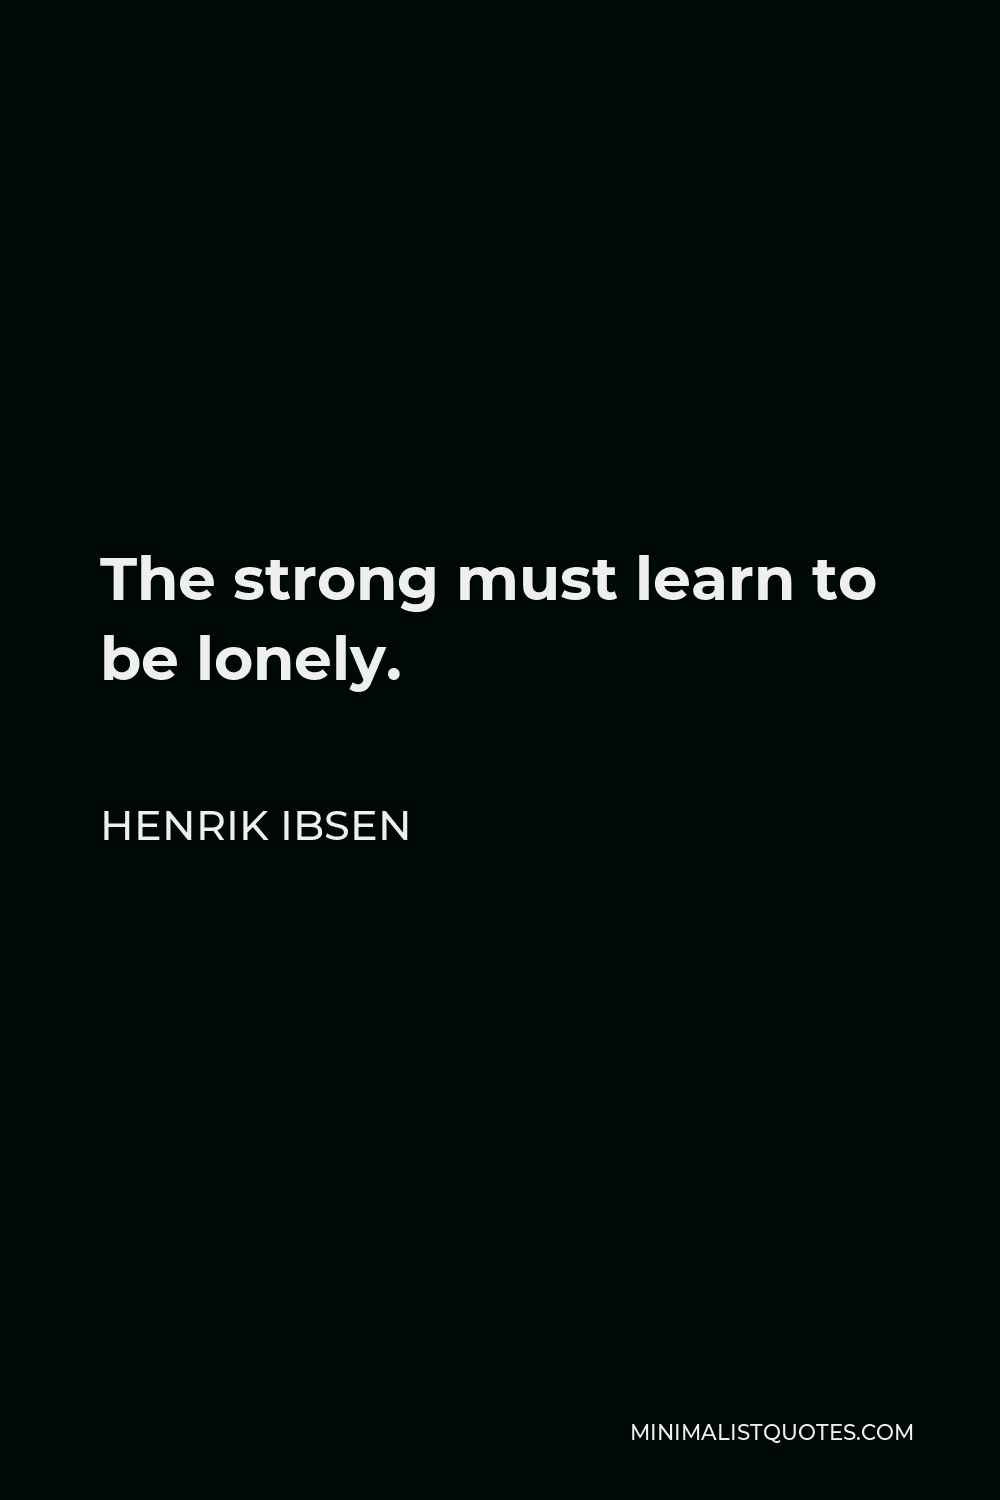 Henrik Ibsen Quote - The strong must learn to be lonely.